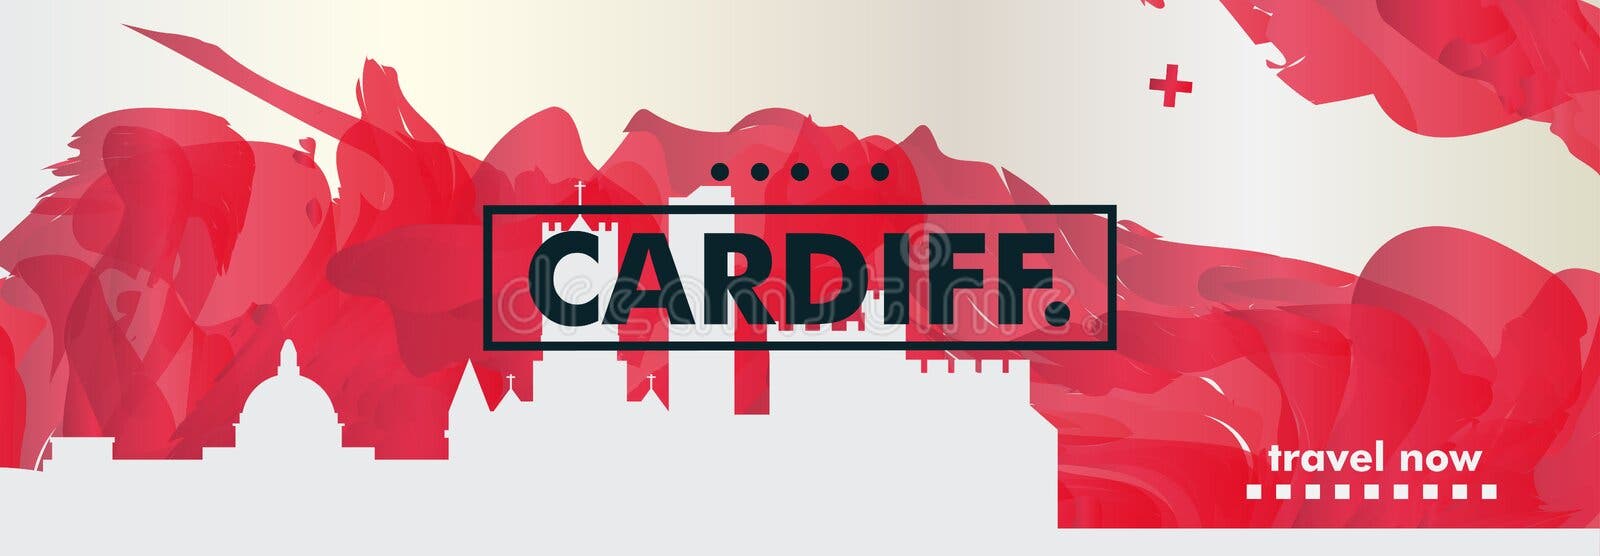 Cardiff City FC Logo PNG Vector (AI) Free Download